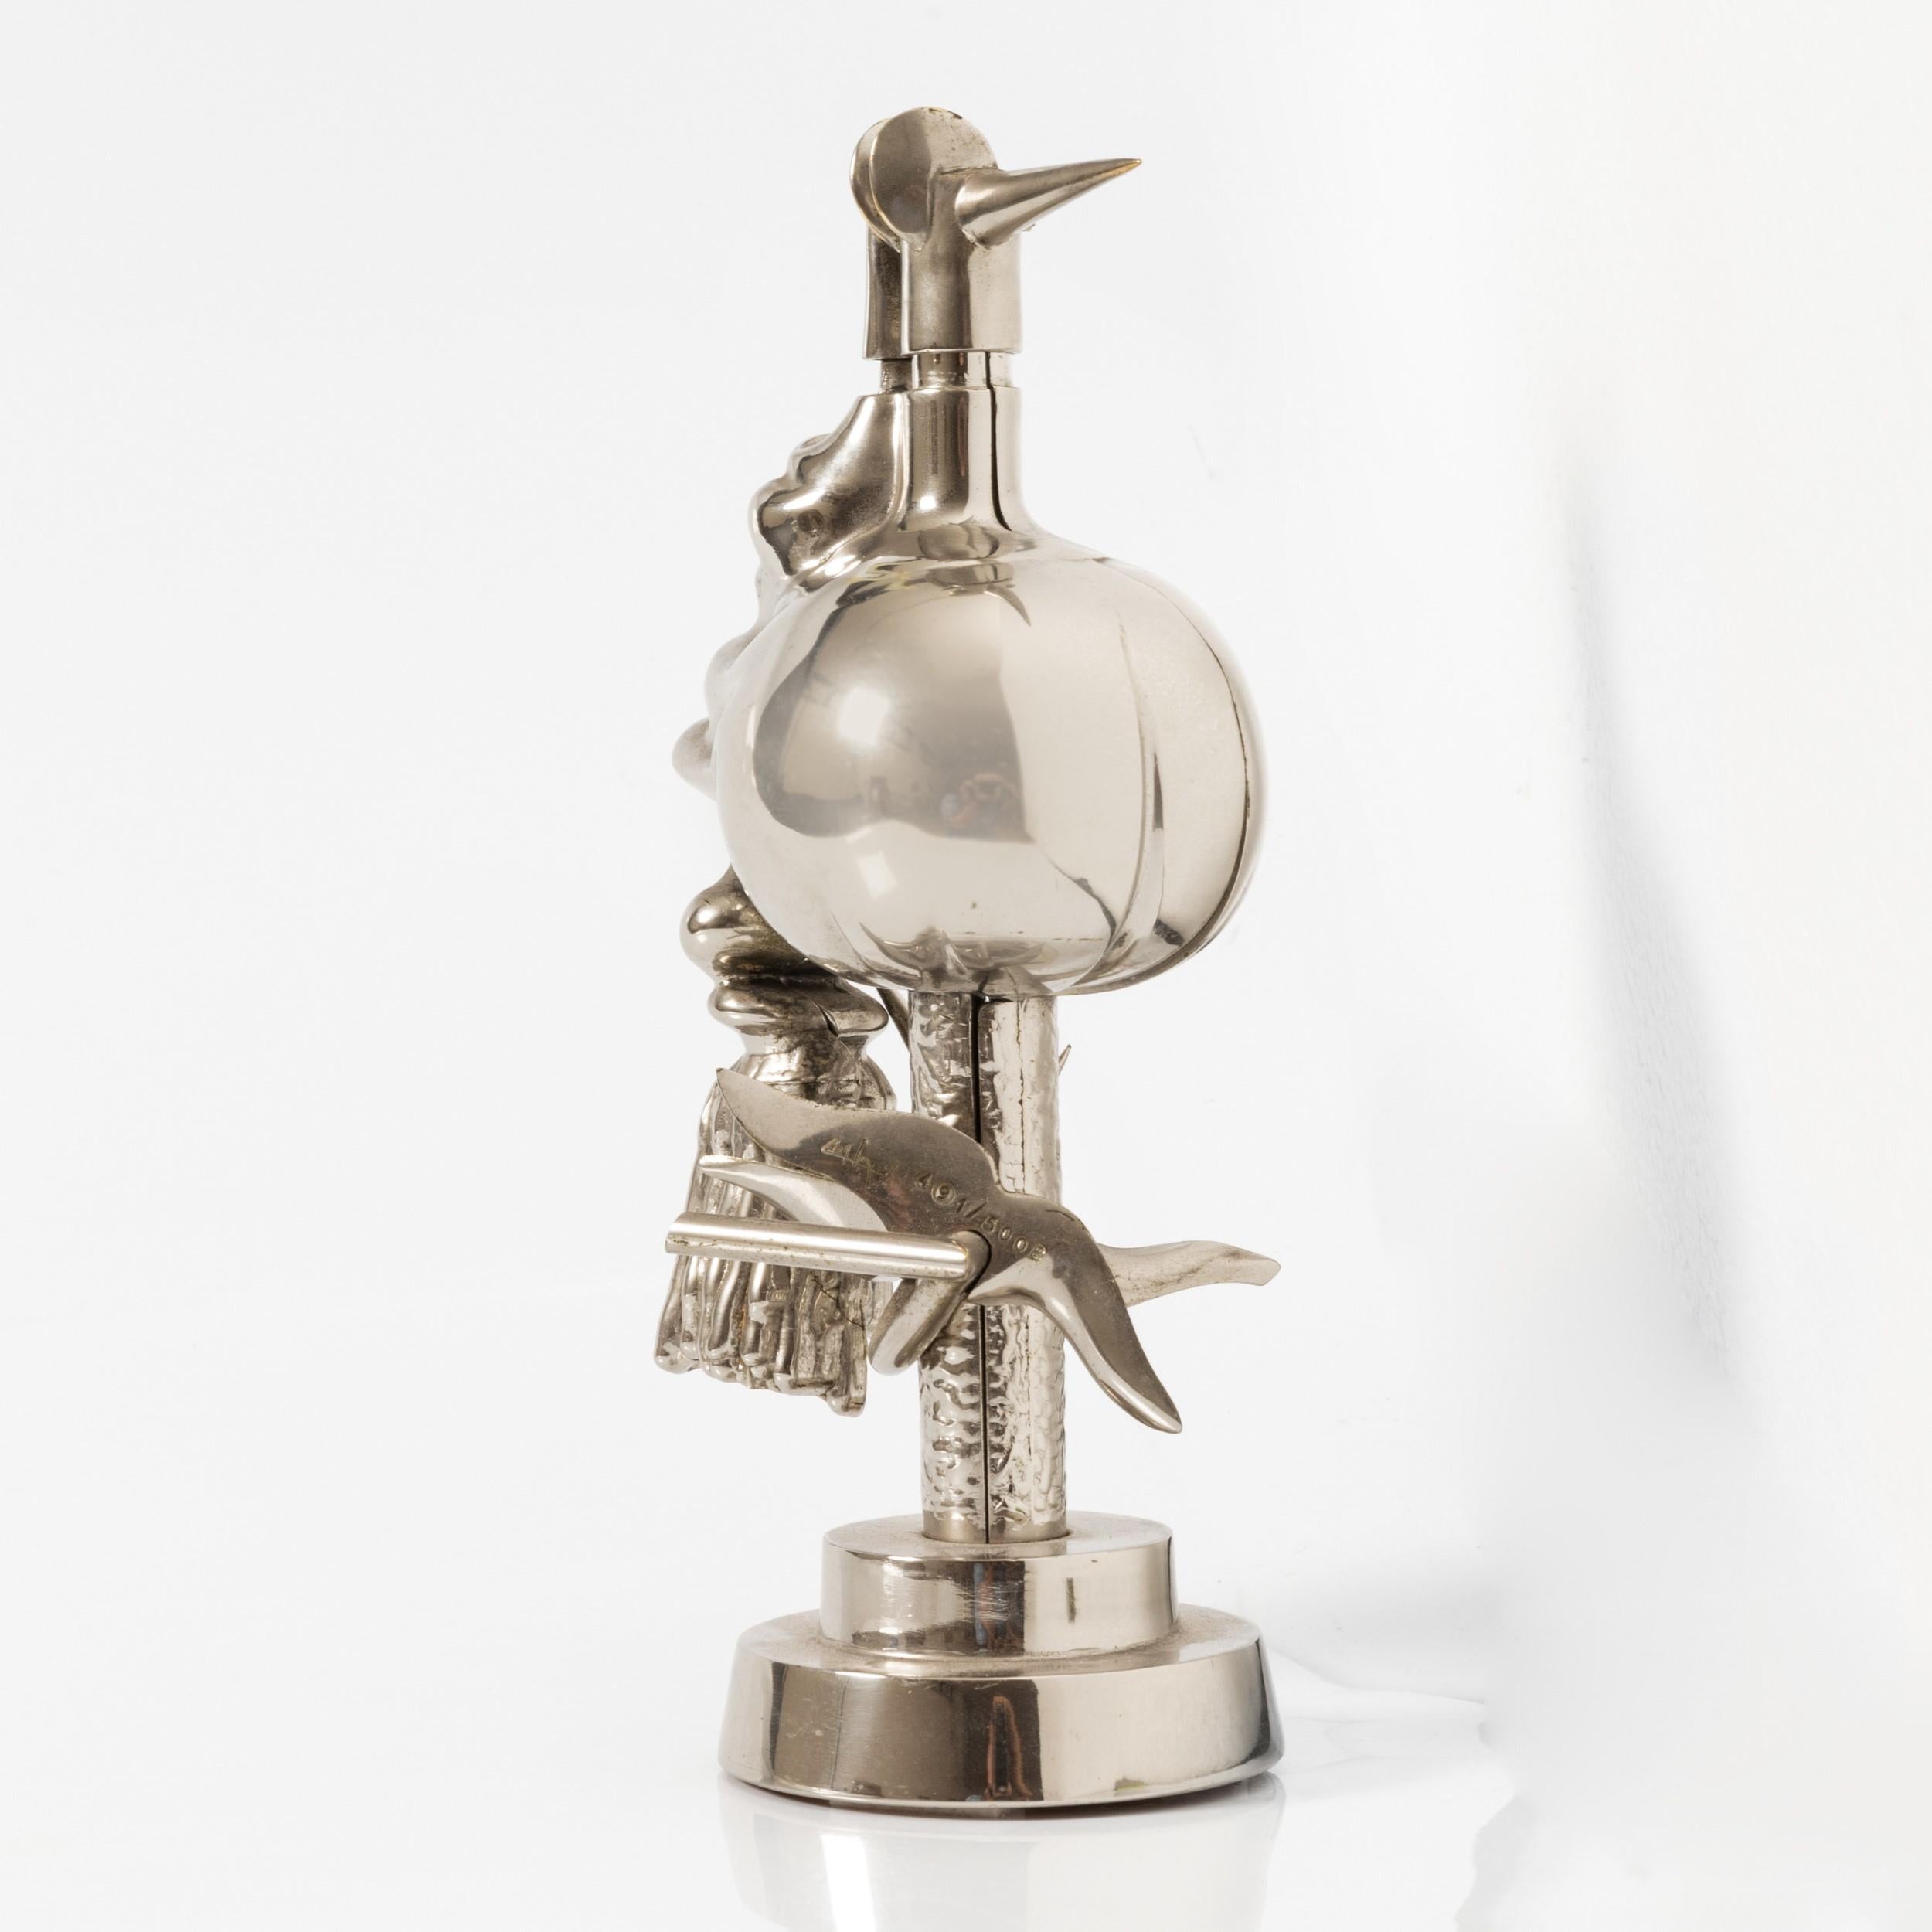 Wifredo Lam ( 1902 – 1982 )

nickel plated brass sculpture
limited edition of 500 copies
inscribed signature, numbered: 491/500 B
sculpture size: 10 1/2 x 5 x 7 in. (26.7 x 12.7 x 17.8 cm)
Excellent conditions

A regular certificate of authenticity